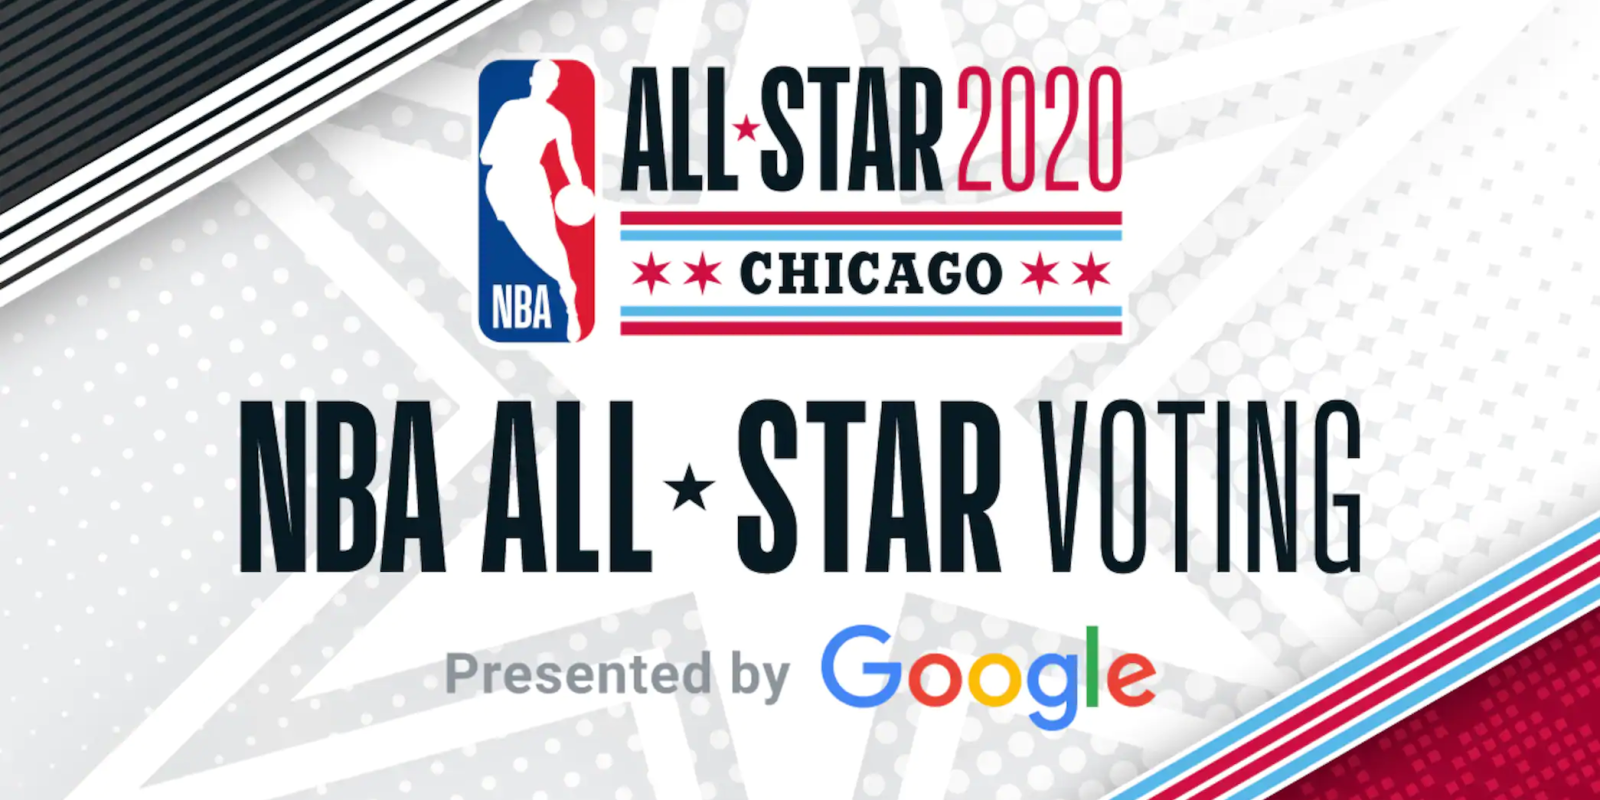 NBA All-Star Voting is again exclusive to Google for 2020 - 9to5Google